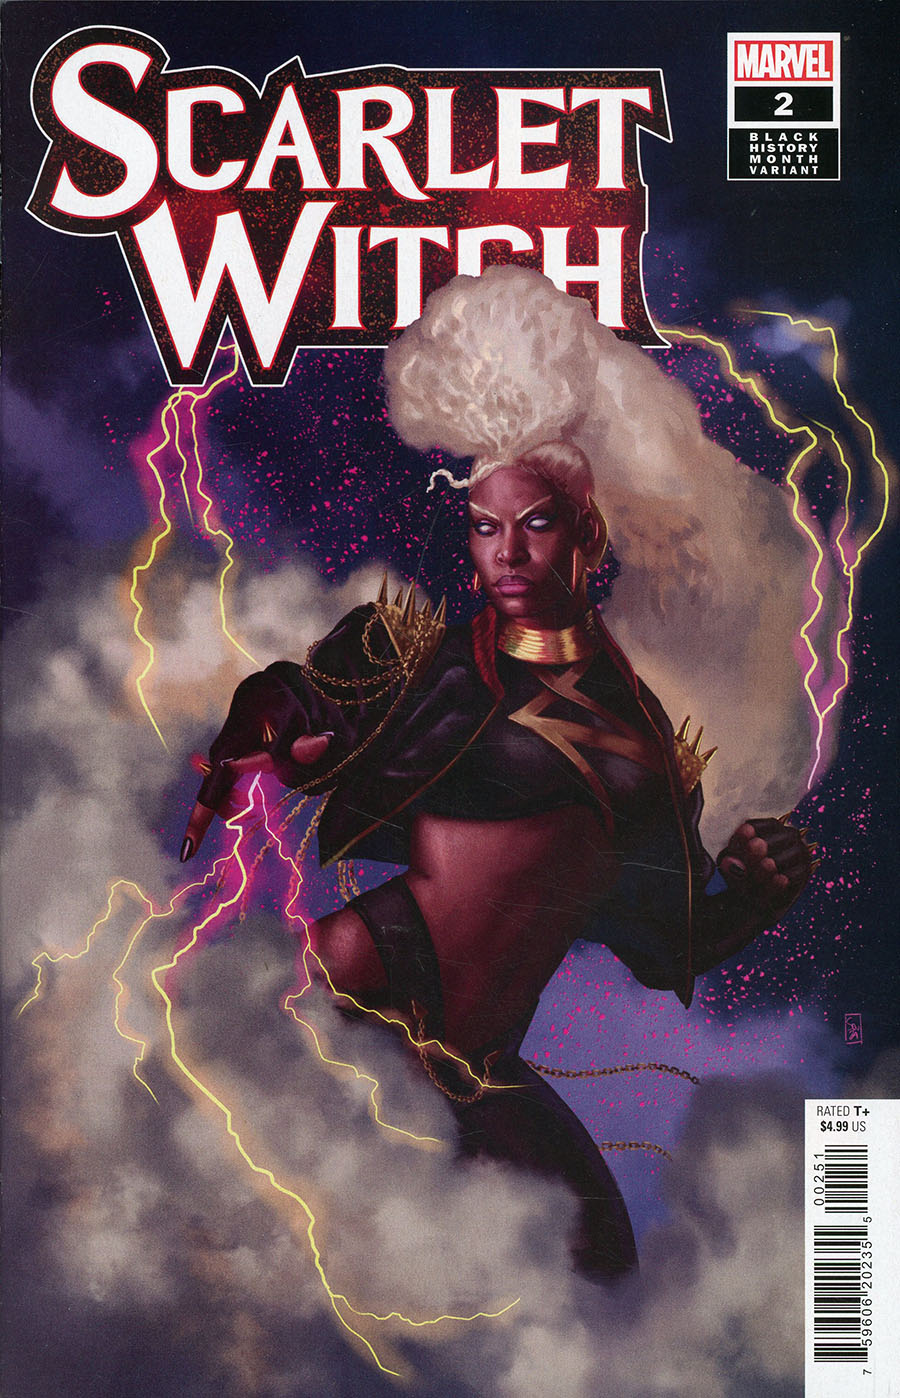 Scarlet Witch Vol 3 #2 Cover B Variant Ernanda Souza Storm Black History Month Cover